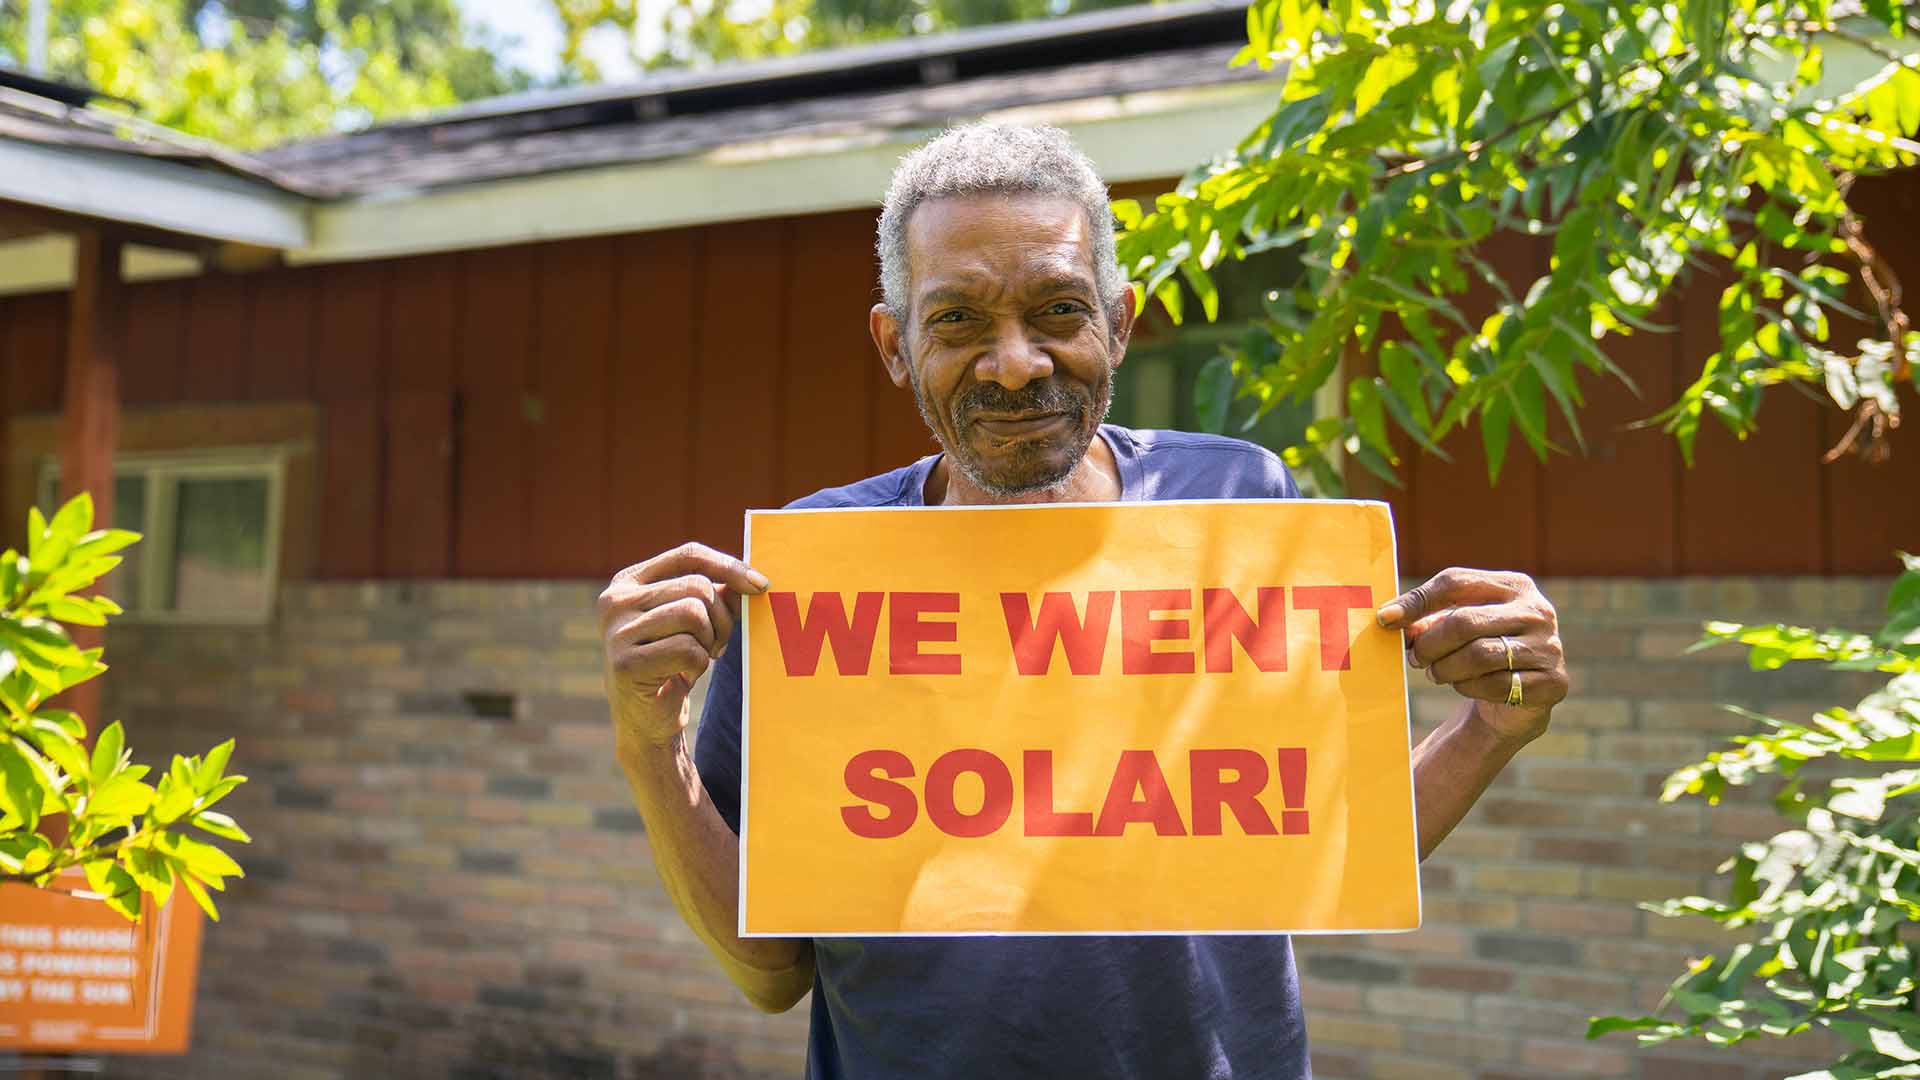 Man holding "We went solar!" sign in a backyard.